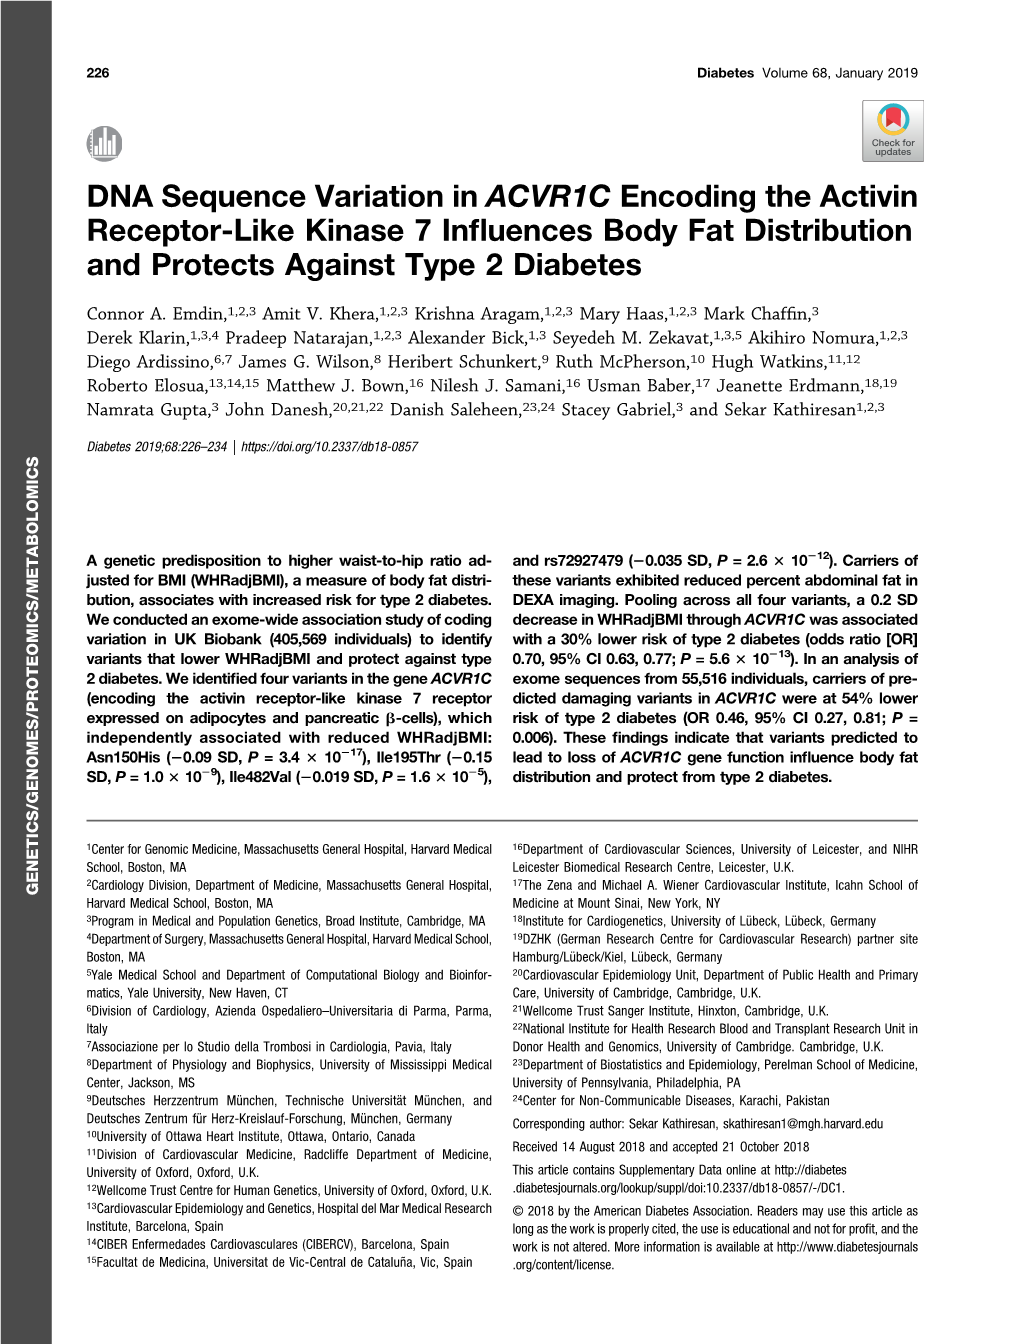 DNA Sequence Variation in ACVR1C Encoding the Activin Receptor-Like Kinase 7 Inﬂuences Body Fat Distribution and Protects Against Type 2 Diabetes